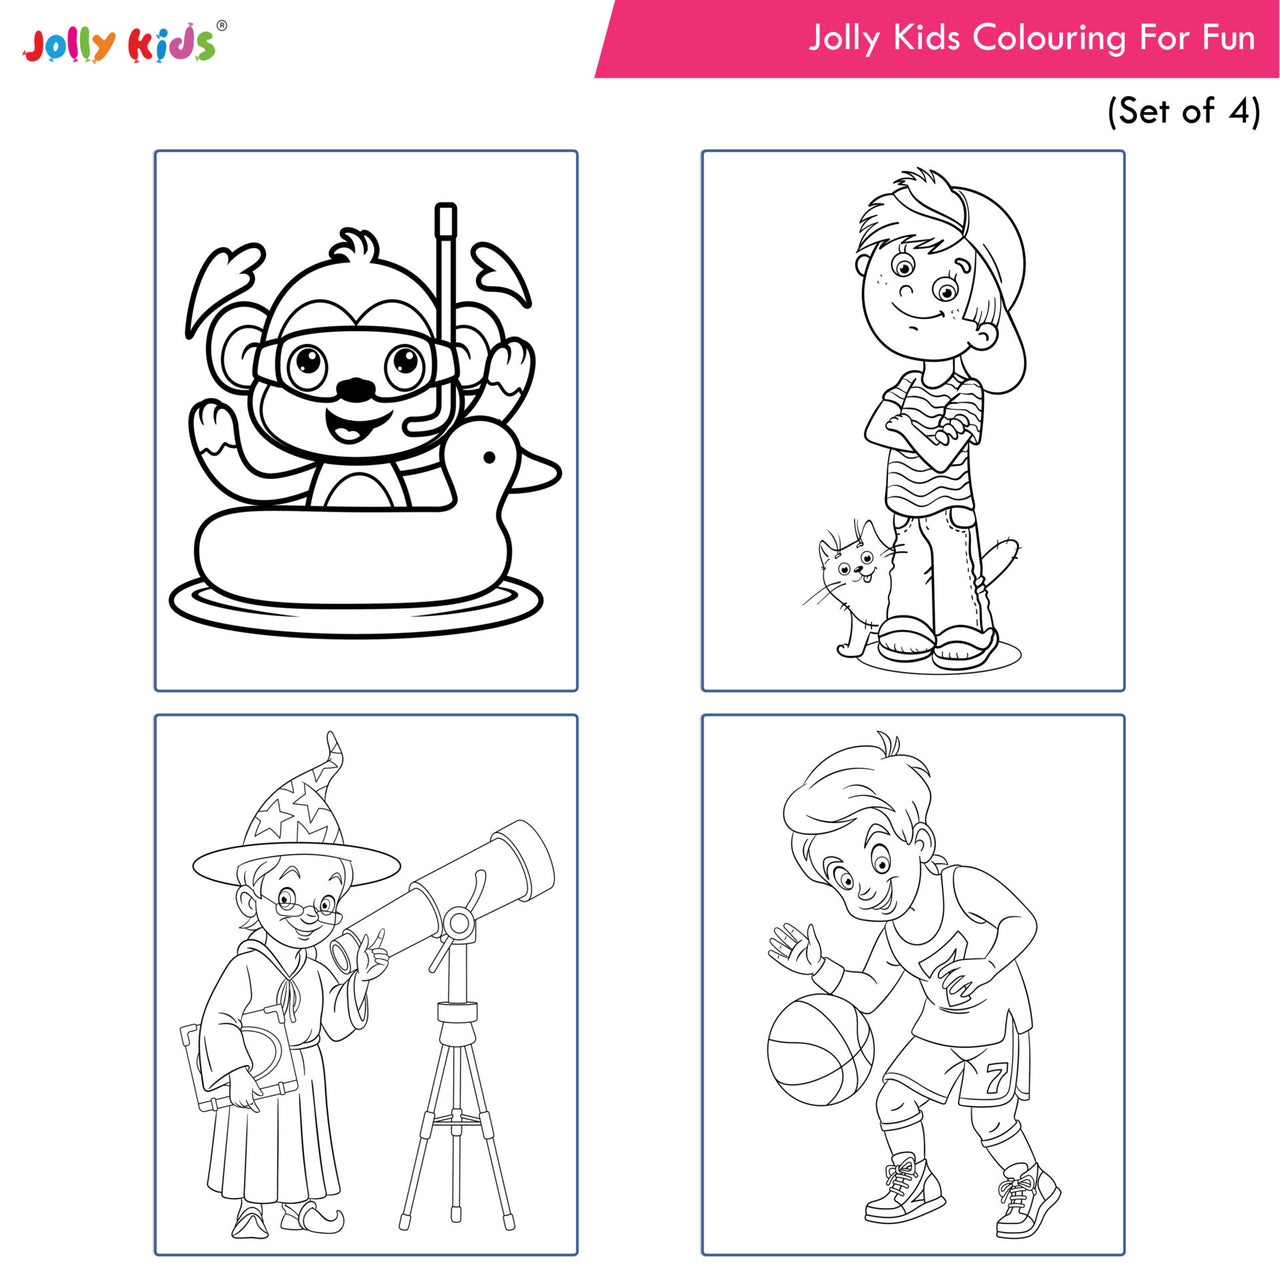 Jolly Kids Colouring for Fun Books B| Set of 4| Each Book 64 Images|Colouring & Painting Books for Kids|Ages 3-8 Year - Distacart